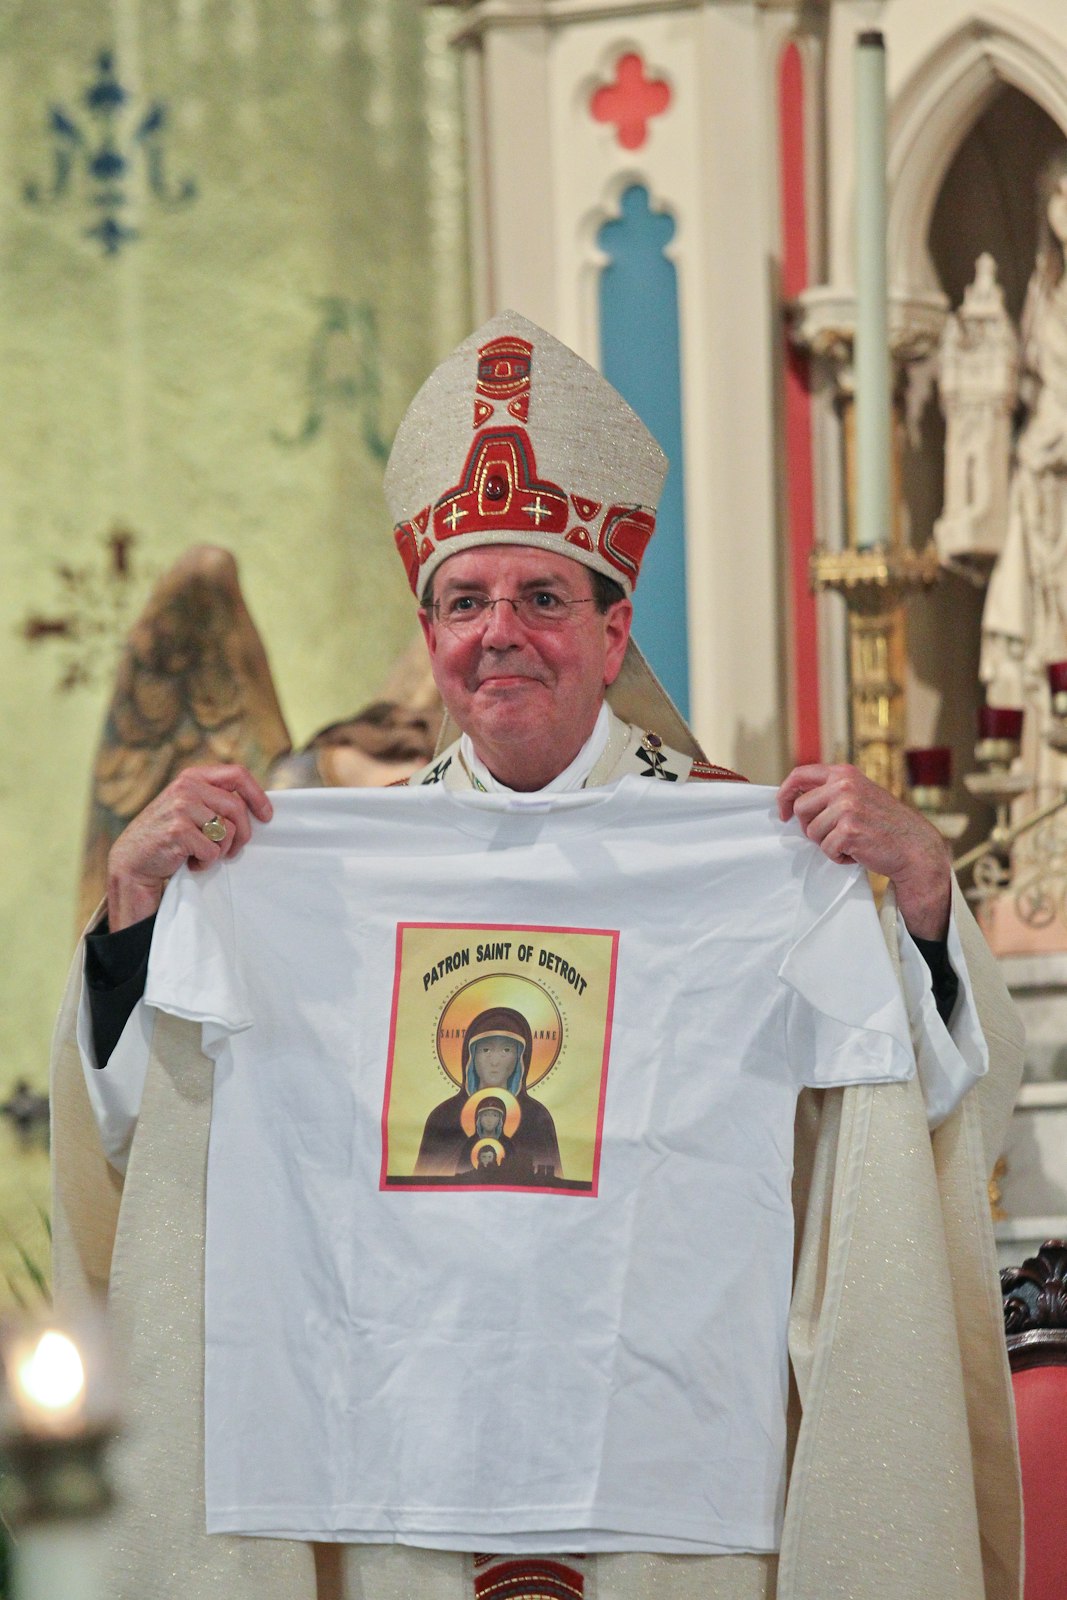 Archbishop Vigneron holds a t-shirt given to him as a gift in celebration of Ste. Anne being named the patroness of the Archdiocese of Detroit in 2011. (Joe Kohn | Detroit Catholic file photo)